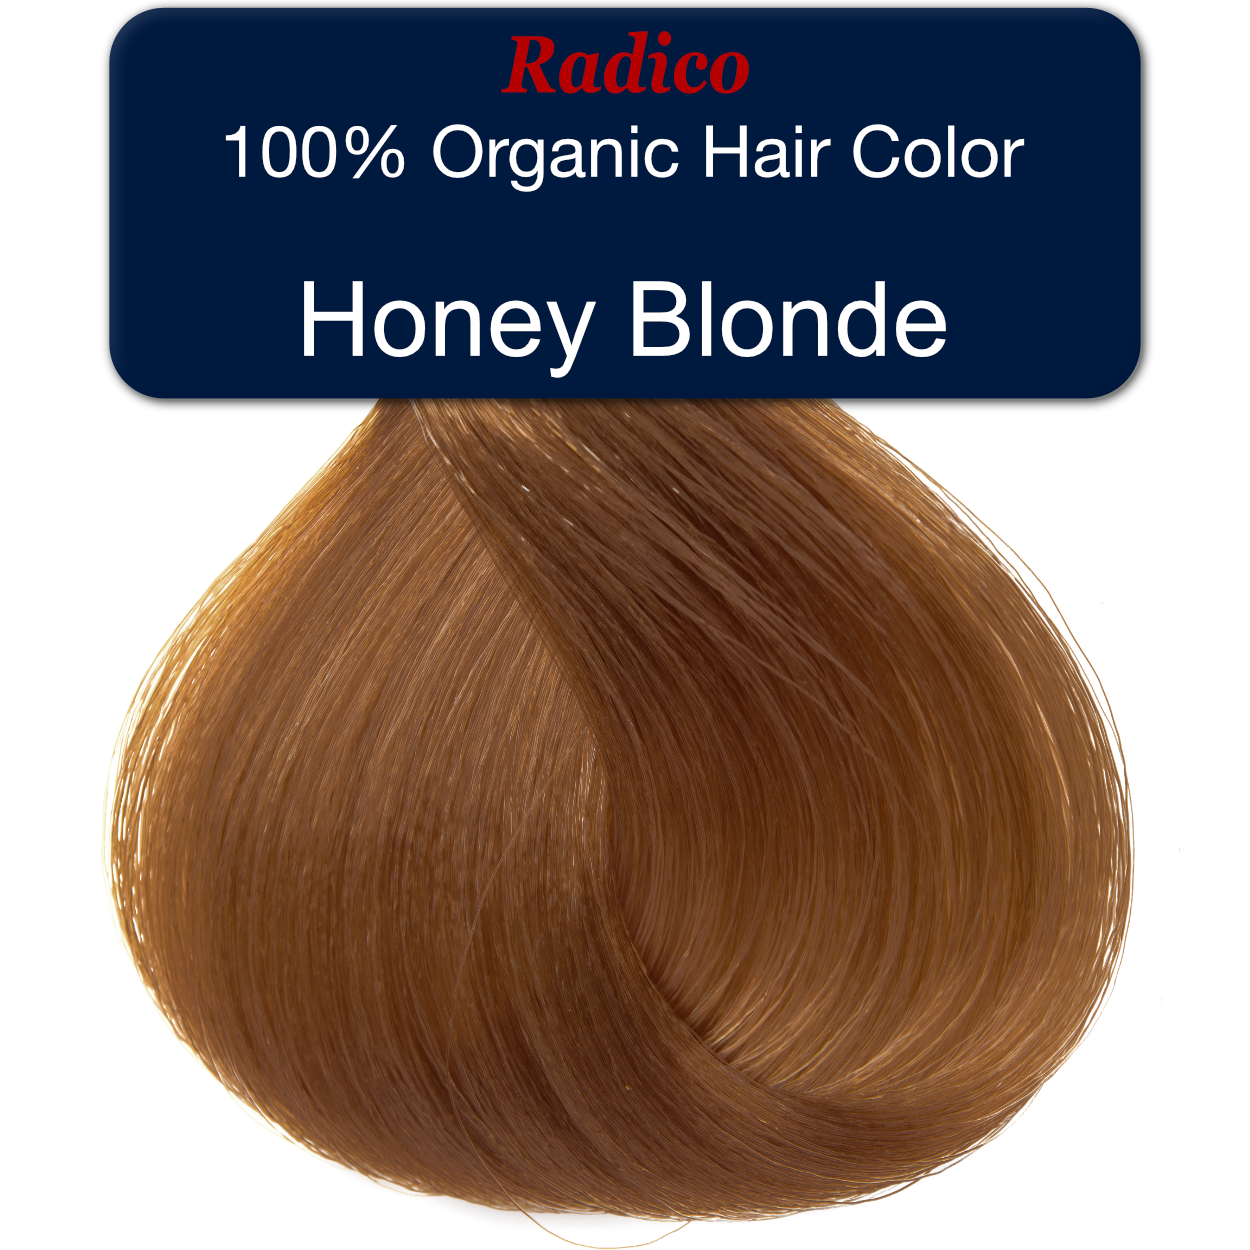 honey blonde hair color pictures